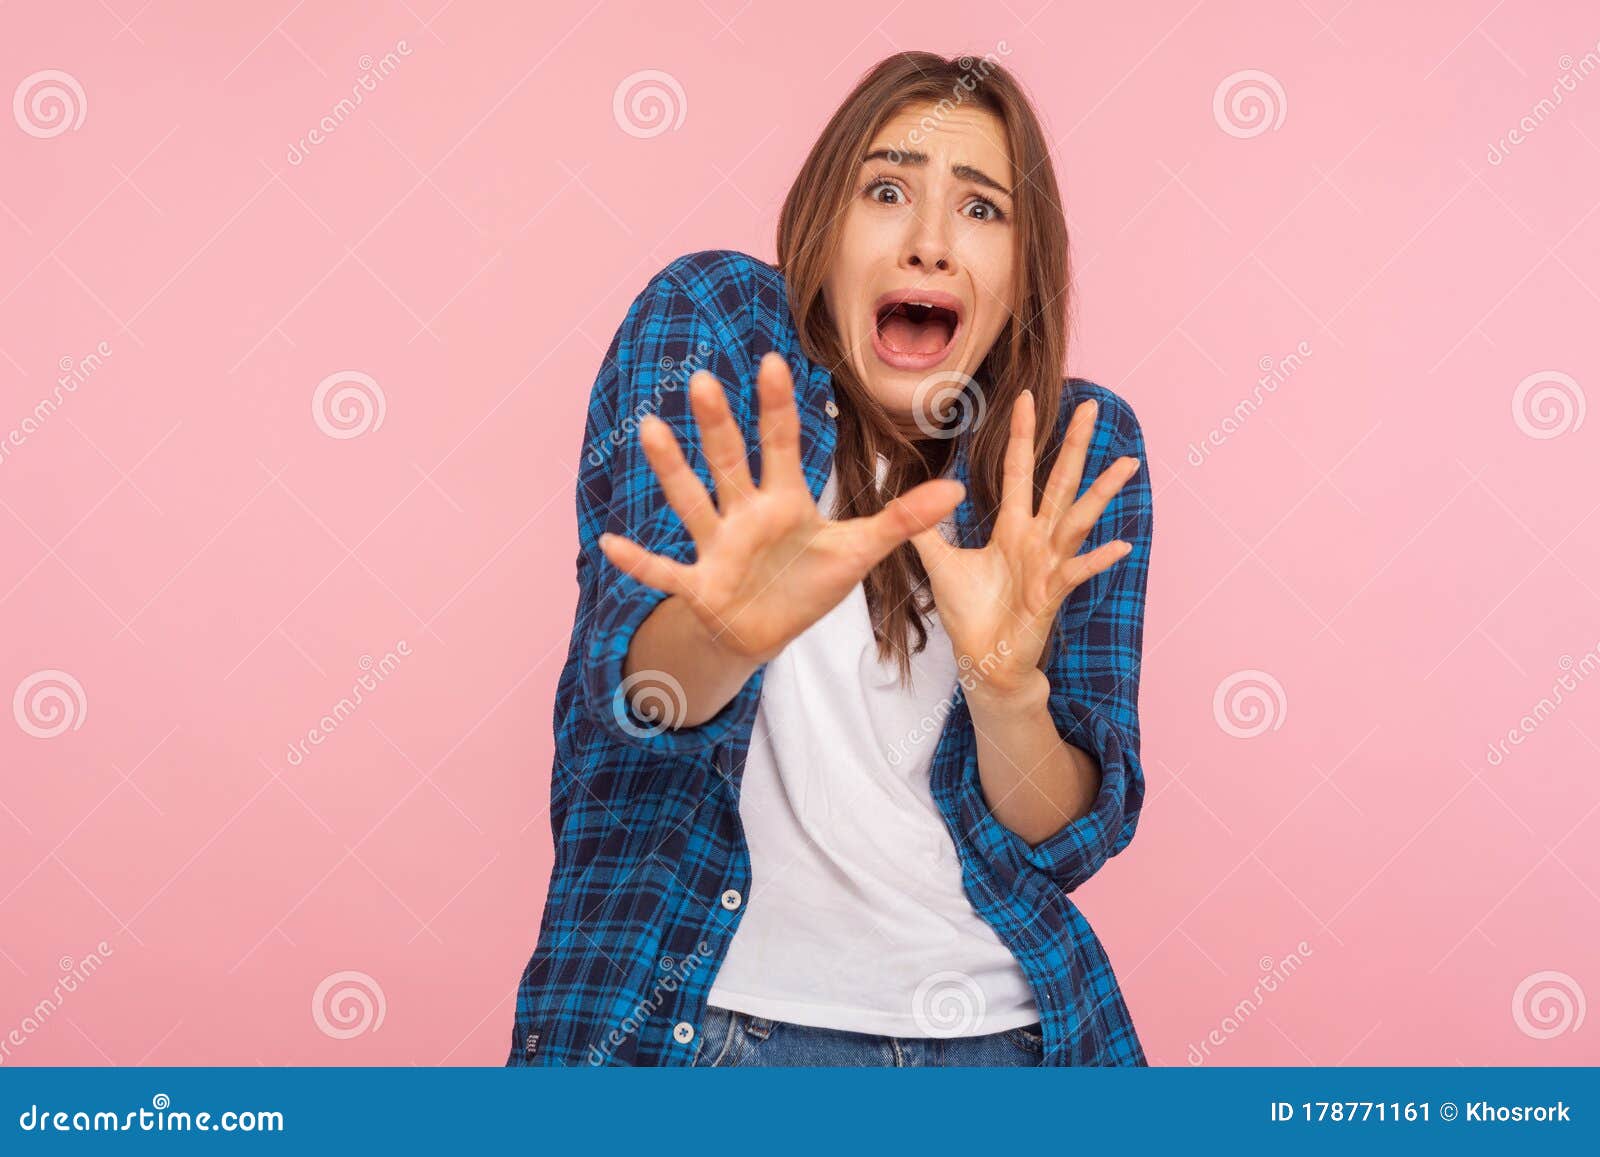 I`m Afraid Portrait Of Scared Terrified Brunette Man Making Frightened Gesture With Raised